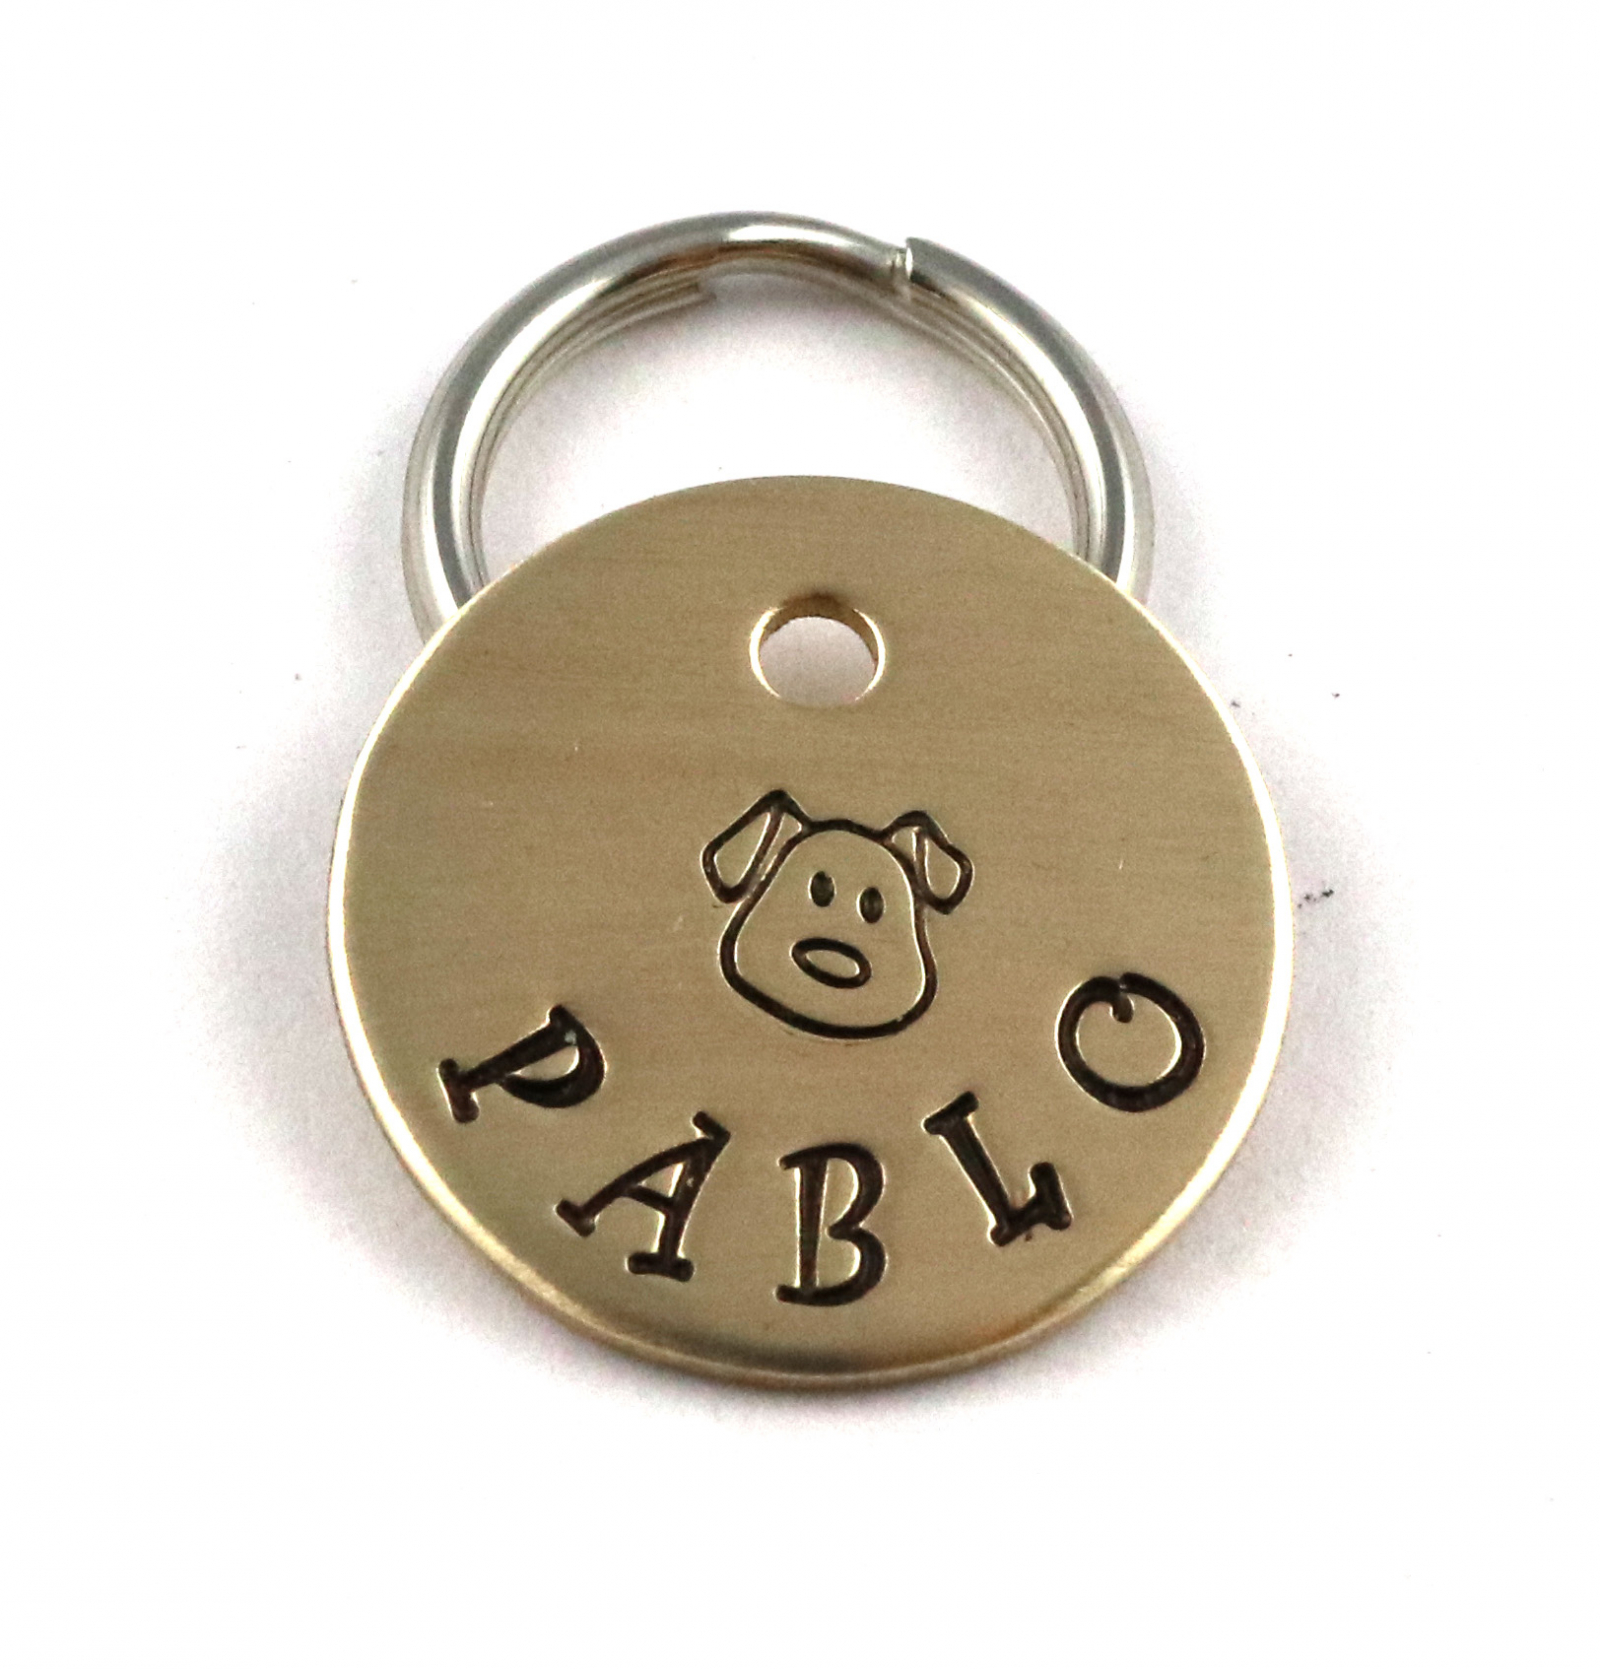 small-dog-id-tag-cute-metal-pet-tag-with-puppy-face-critter-bling